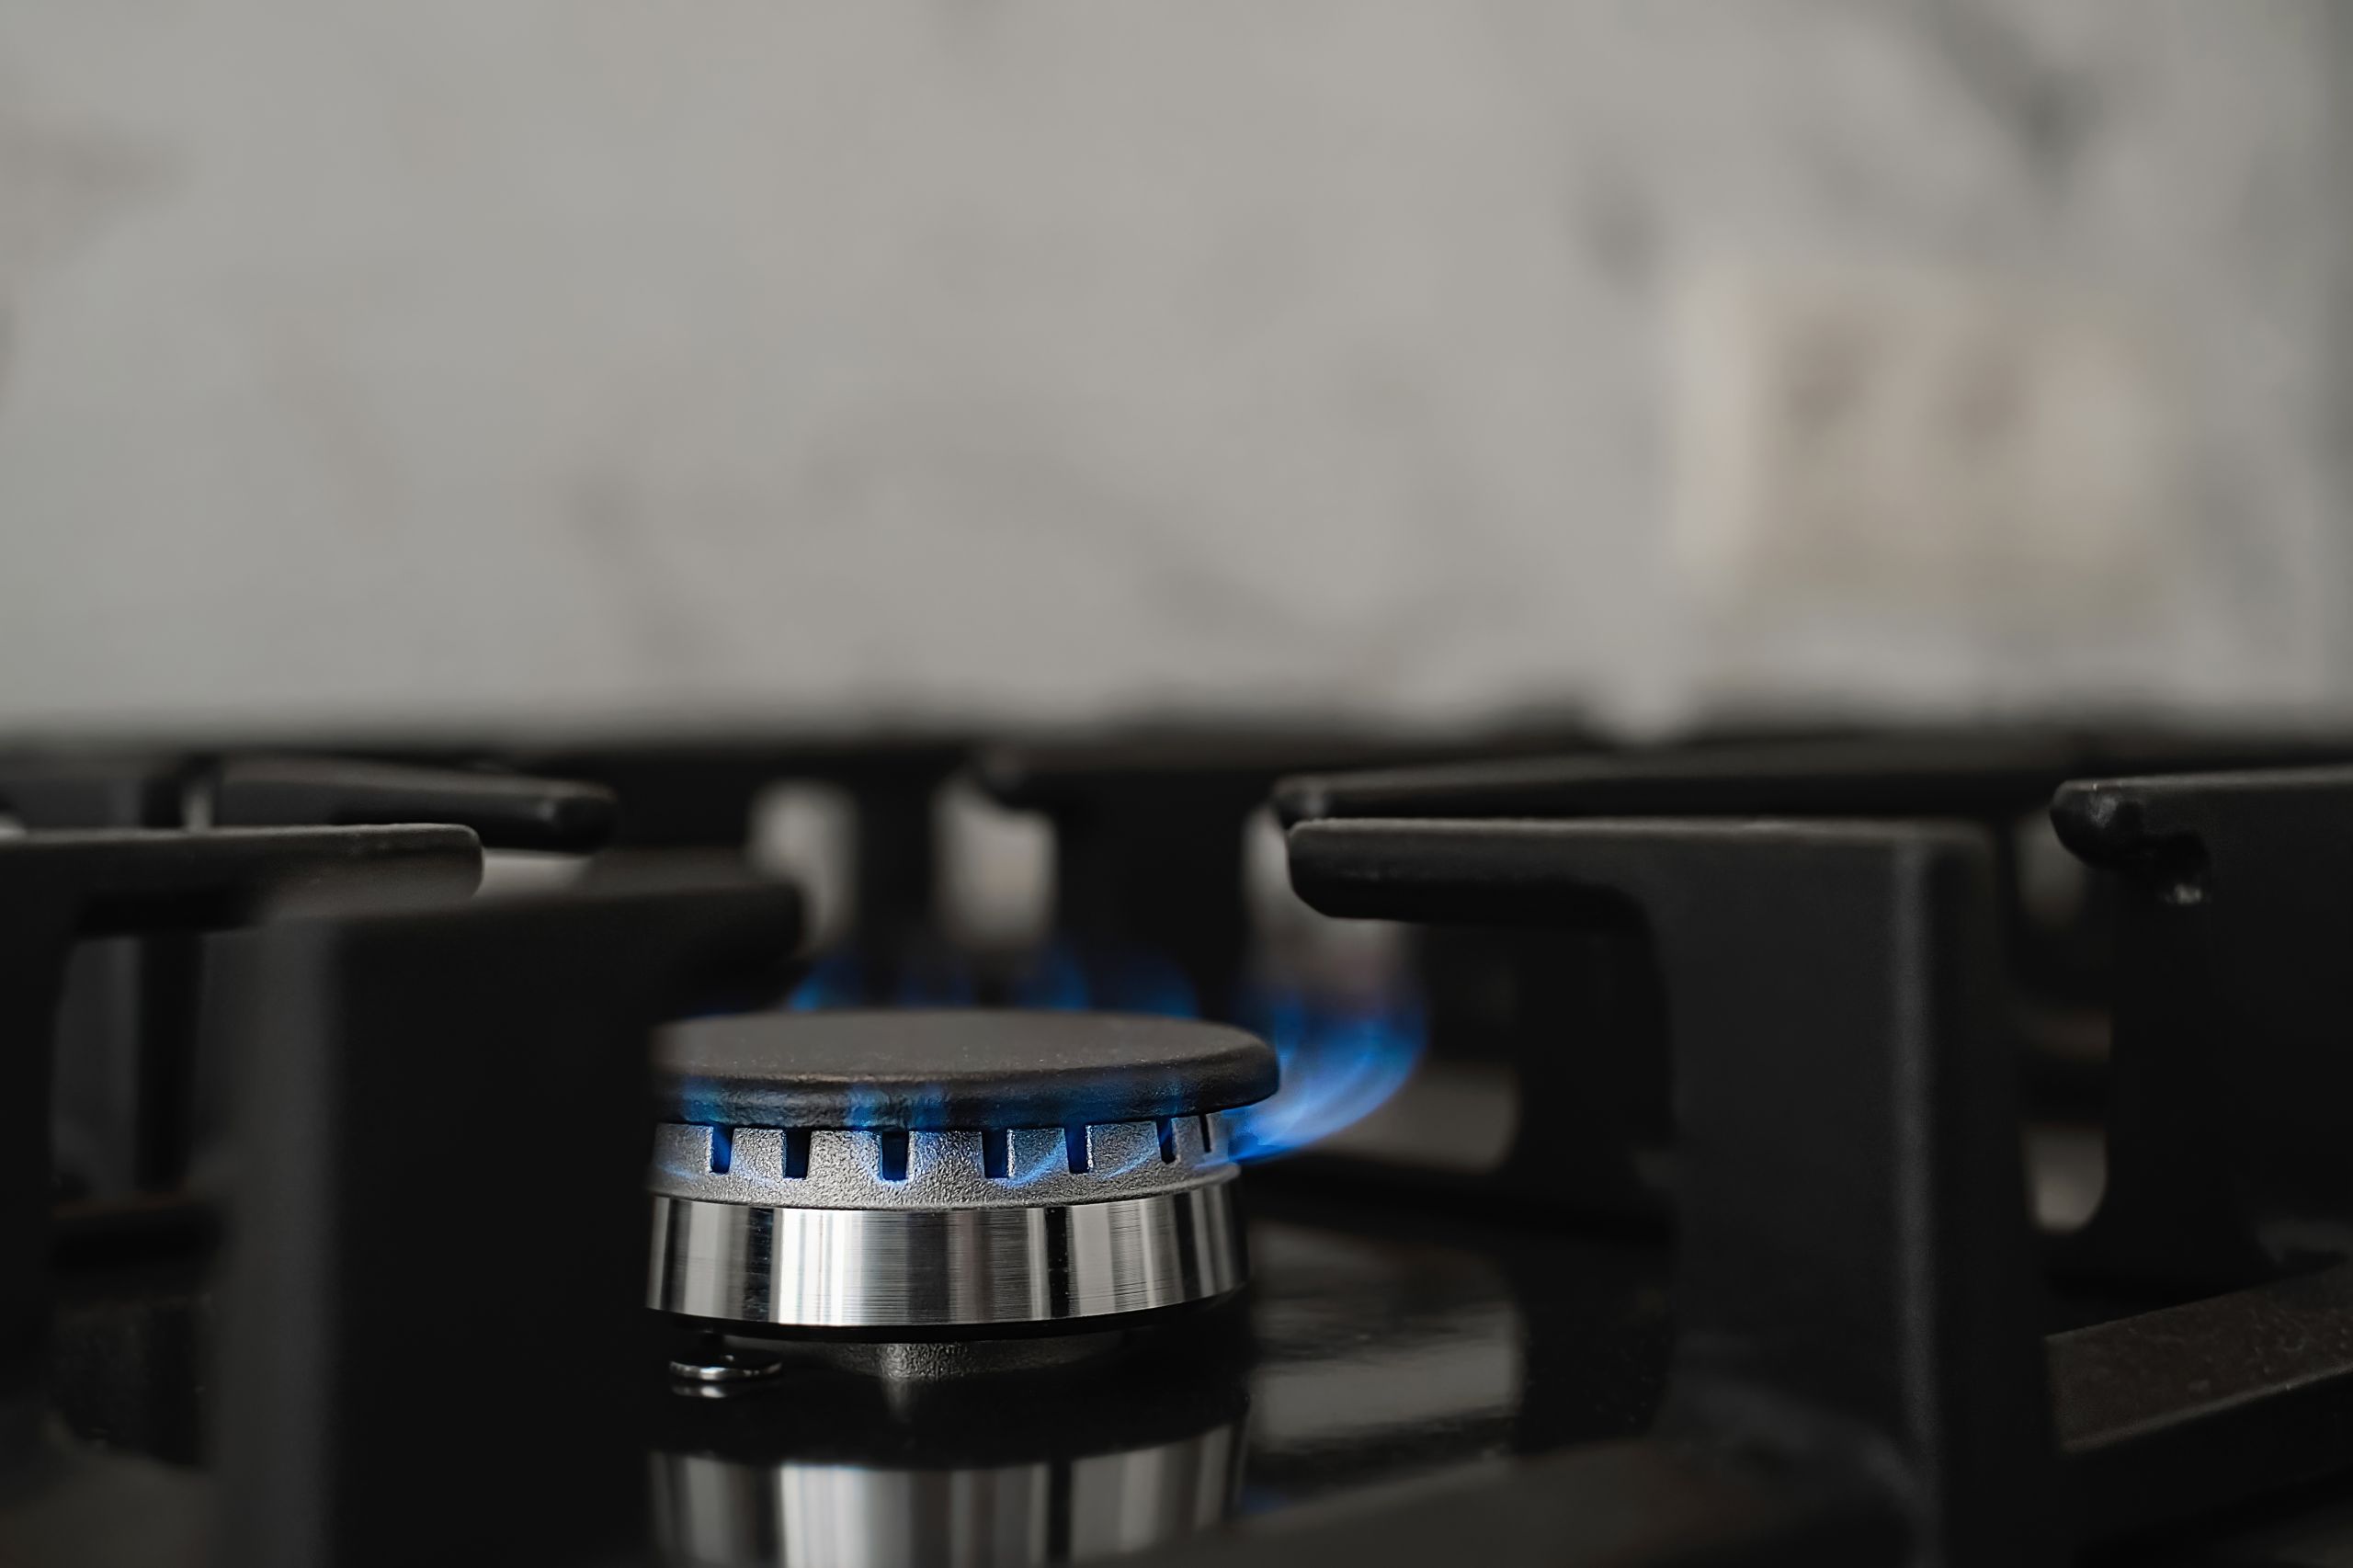 Modern kitchen stove, natural gas burns with a blue flame. Household gas consumption. Close-up, selective focus